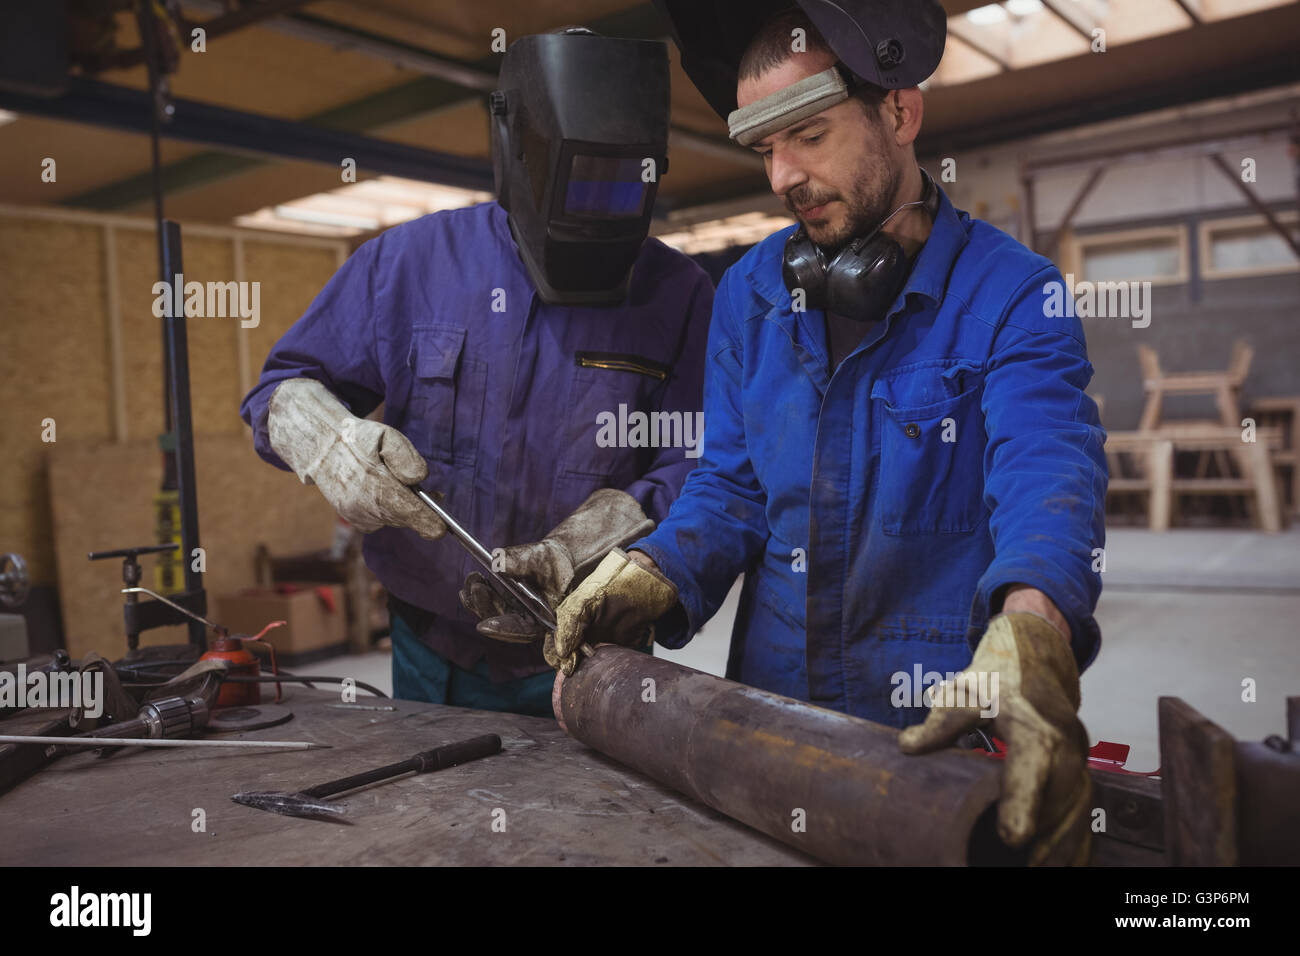 Men working together on a metal work Stock Photo